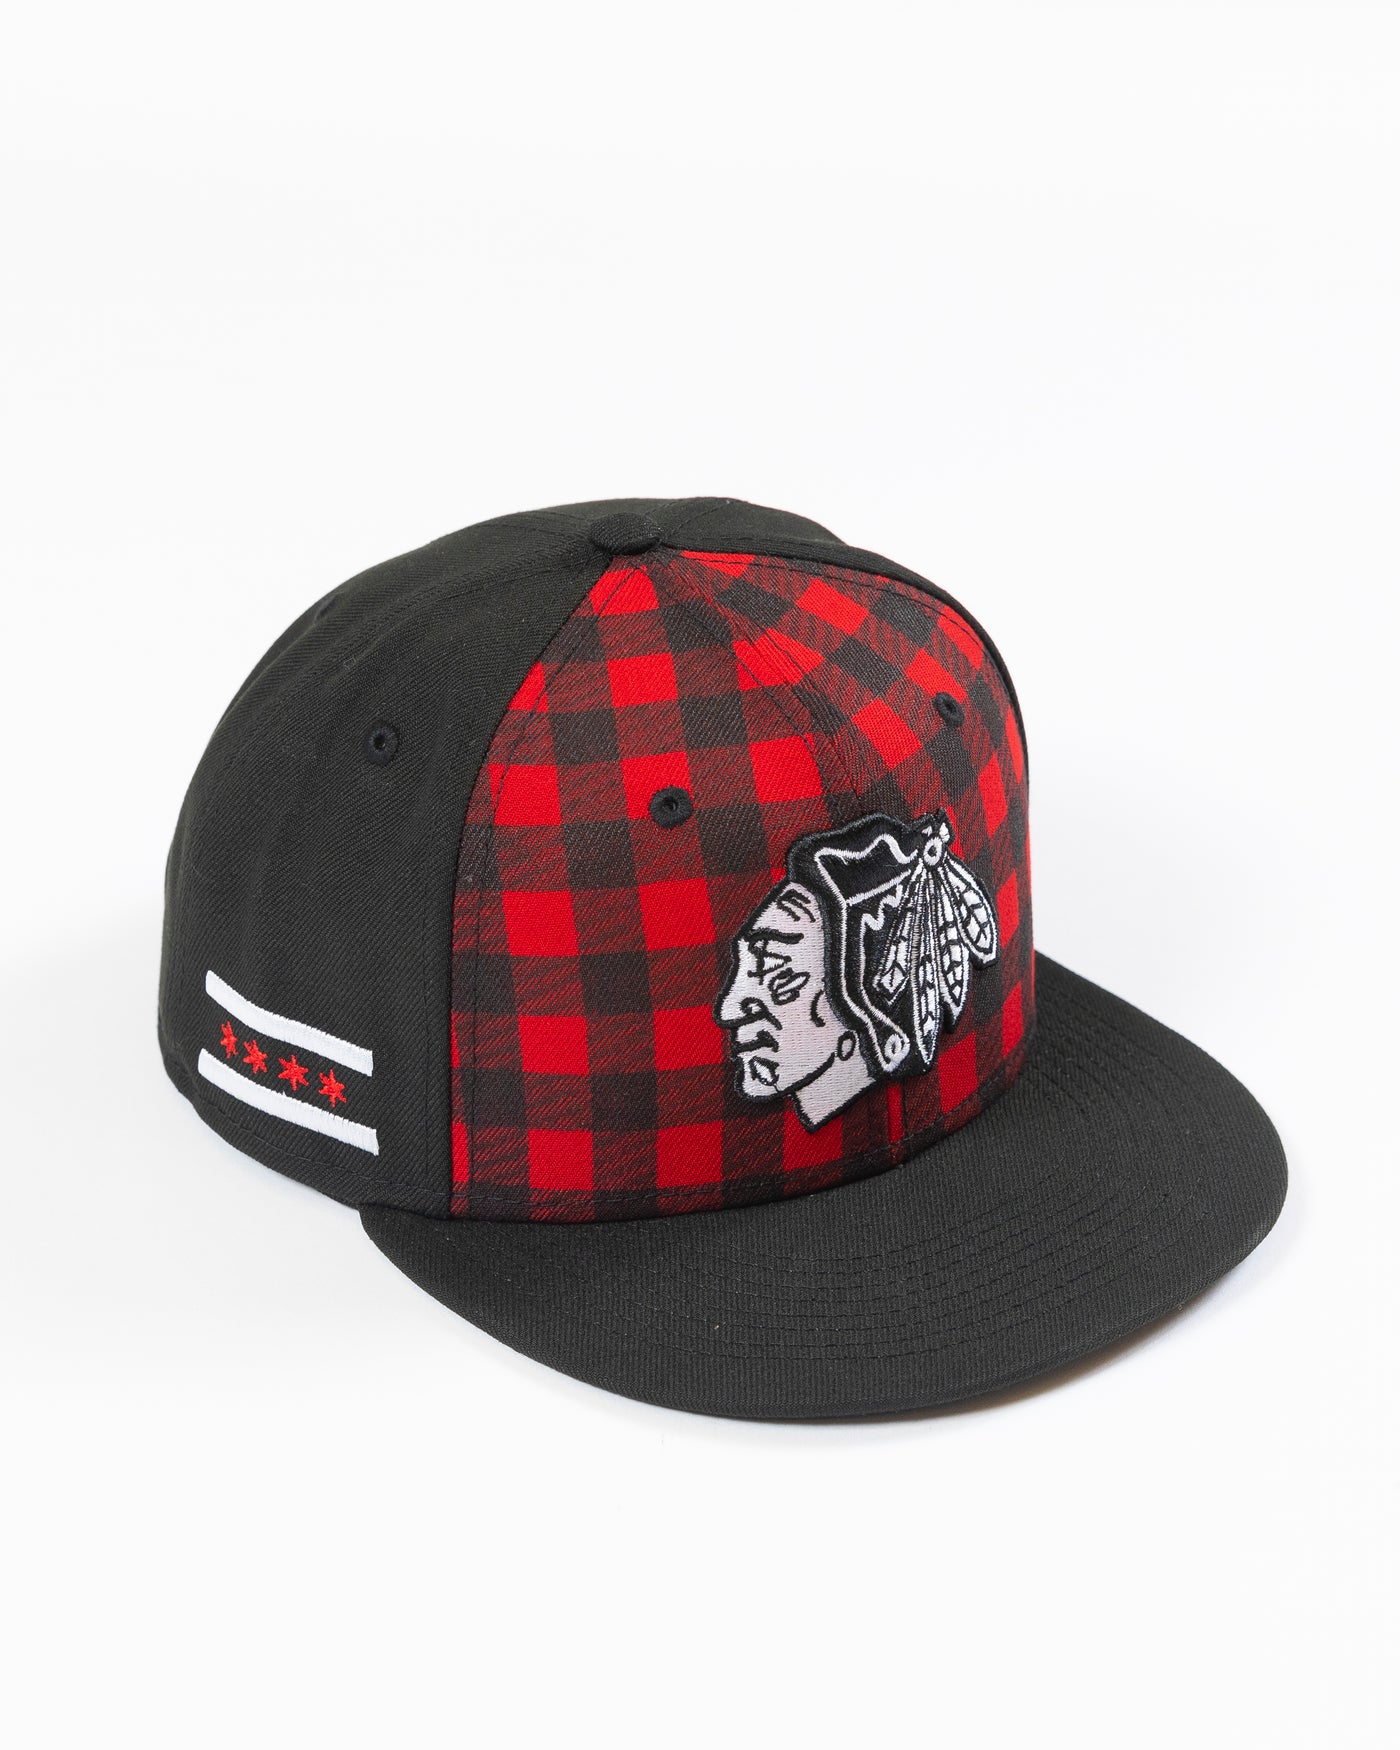 New Era red and black check snapback with tonal primary logo across front - lay flat right side angled image